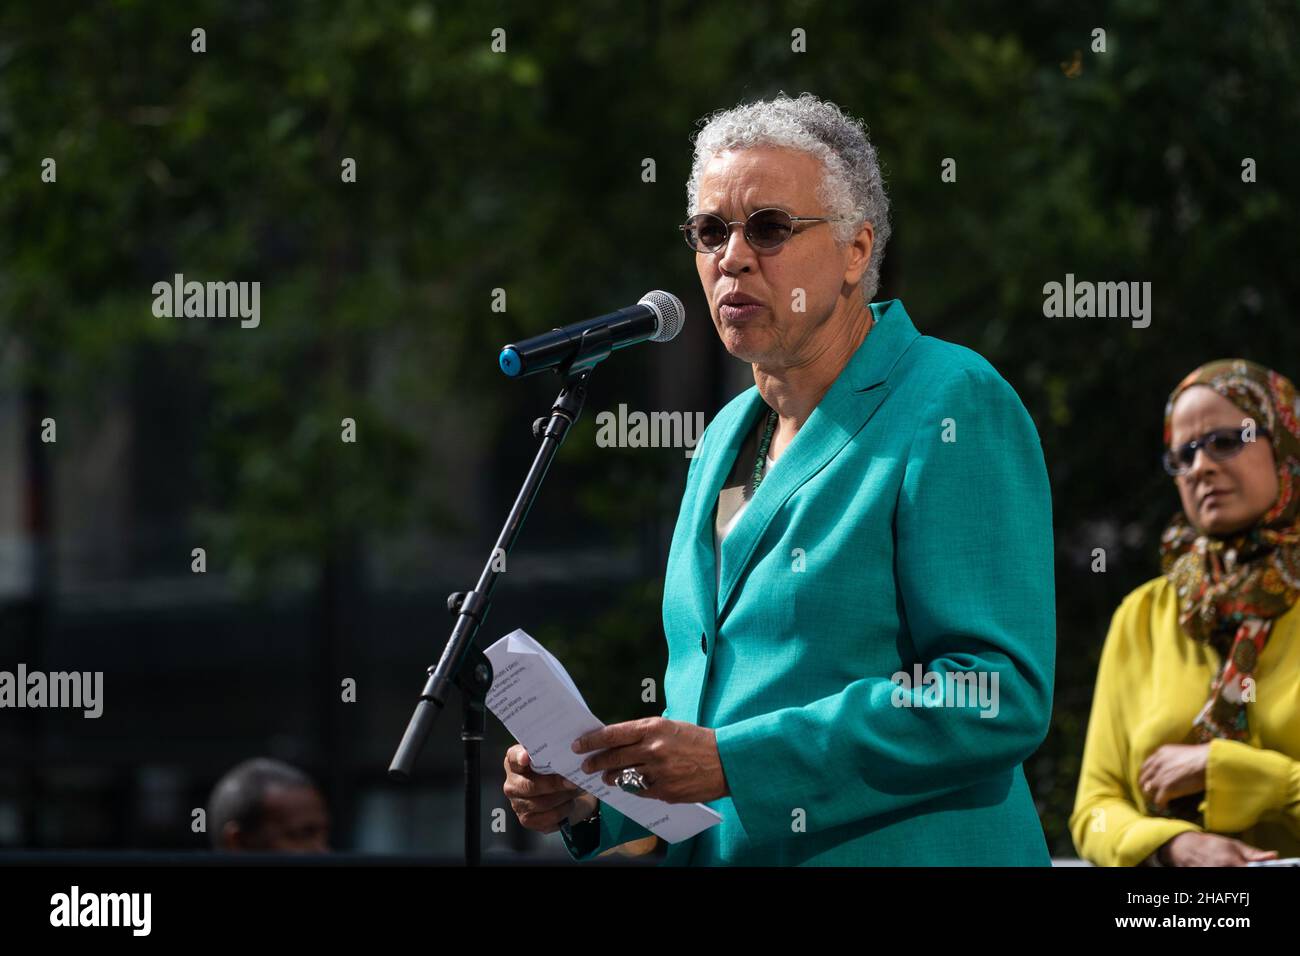 Cook County Board President Toni Preckwinkle speaks at a press conference held at Federal Plaza in Chicago, IL on August 28, 2019. Stock Photo